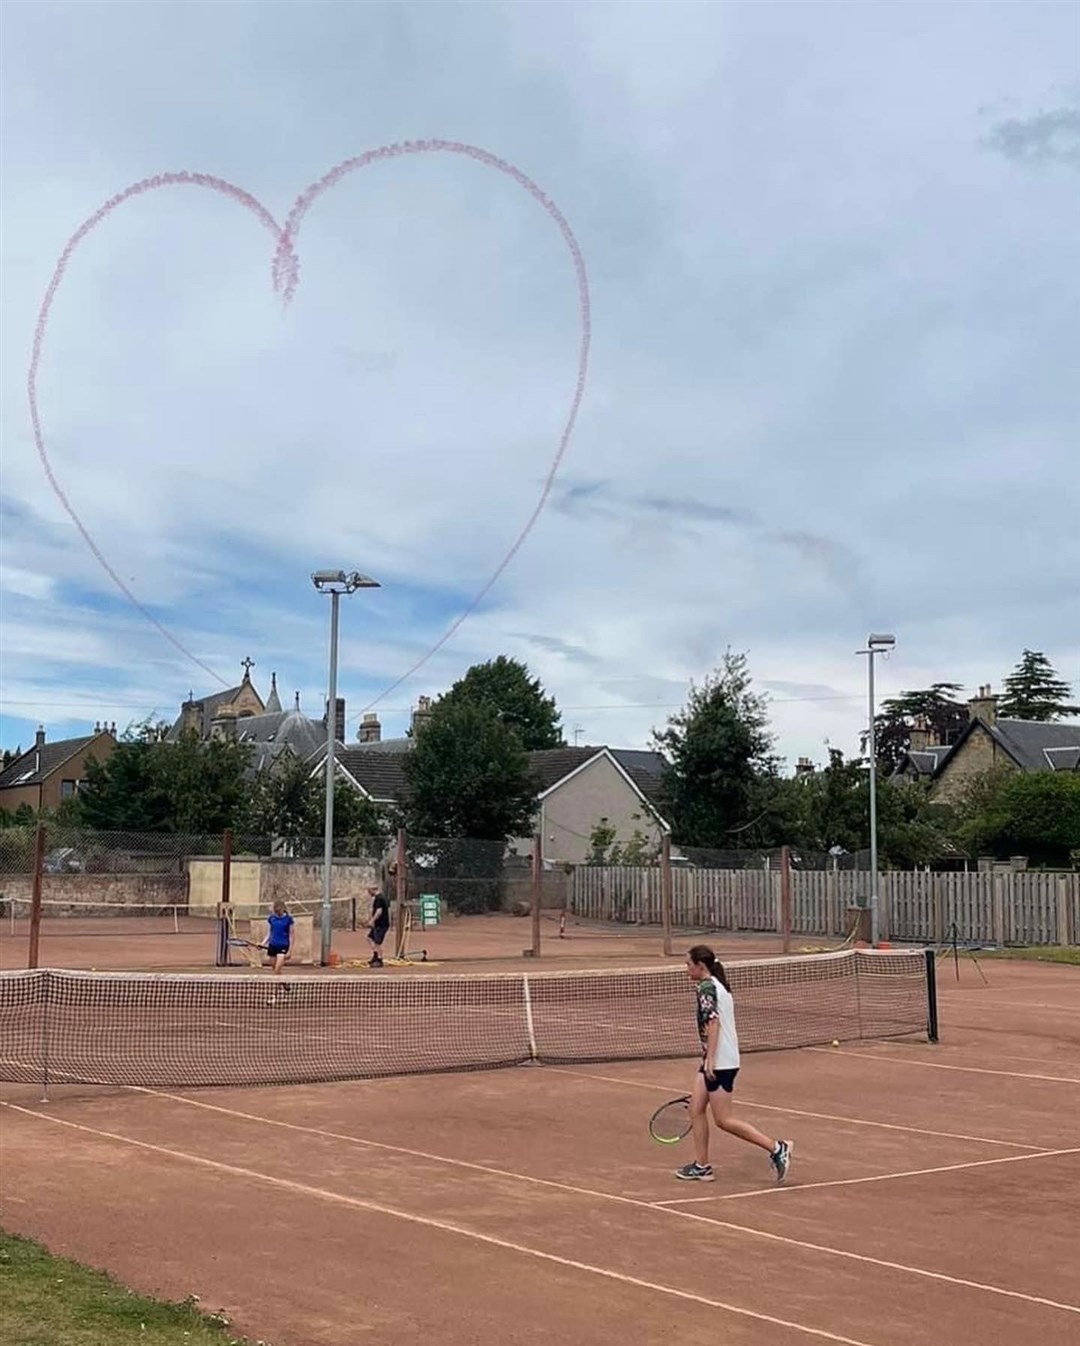 The Red Arrows formed a heart in the sky, which was captured during the North of Scotland Tennis Championships in Elgin.